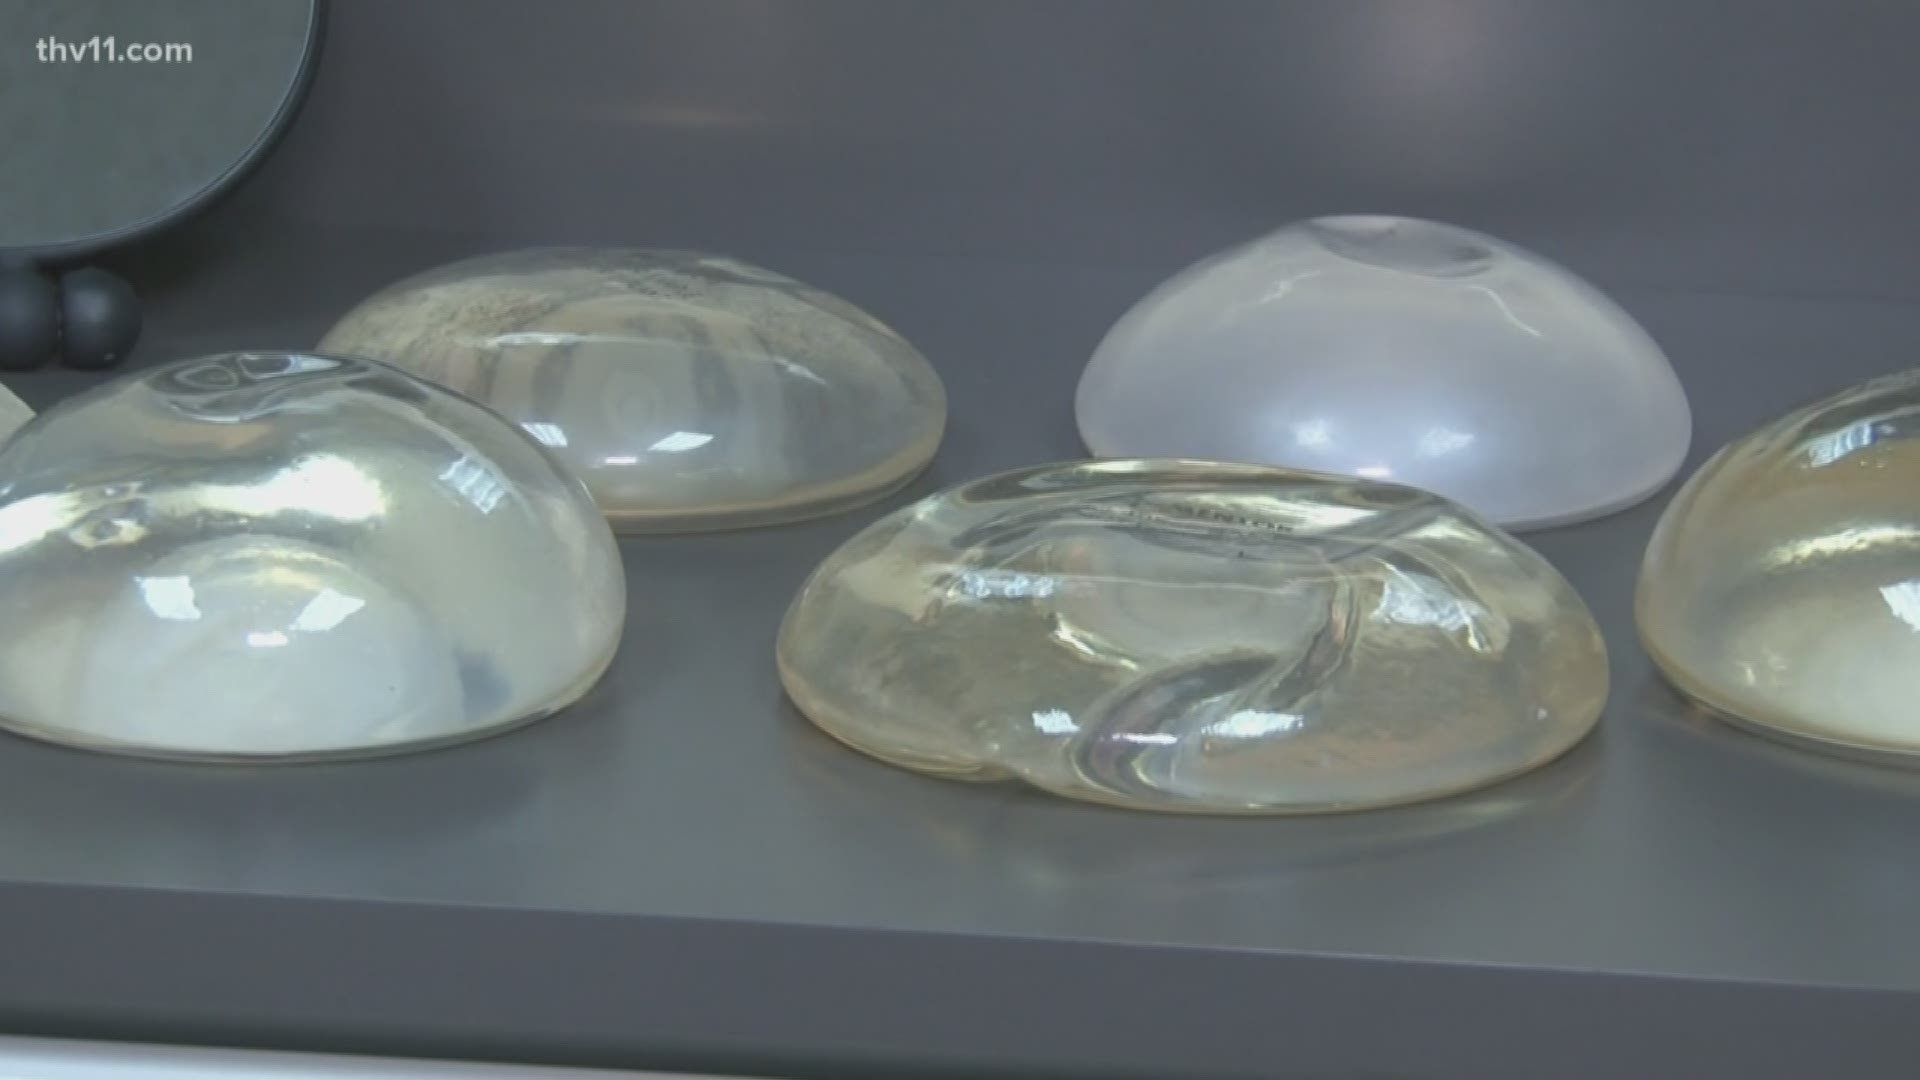 Thousands of women nation-wide have come forward in recent months, claiming their breast implants have made them sick. The FDA wants stronger warnings about them.